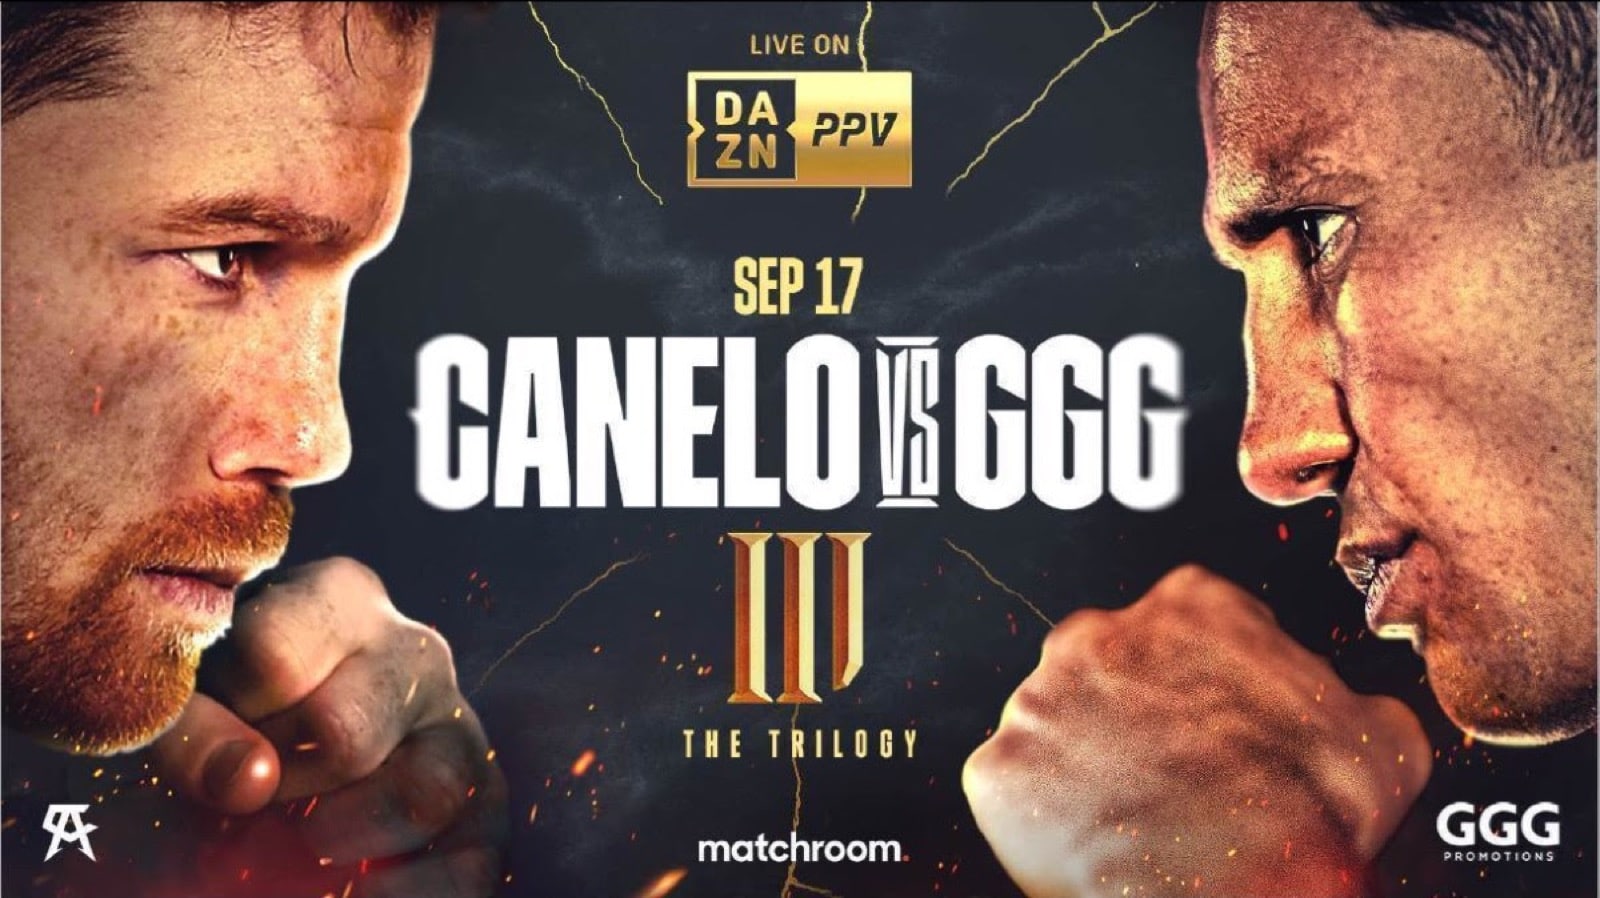 Image: Fans believe GGG can beat Canelo on September 17th